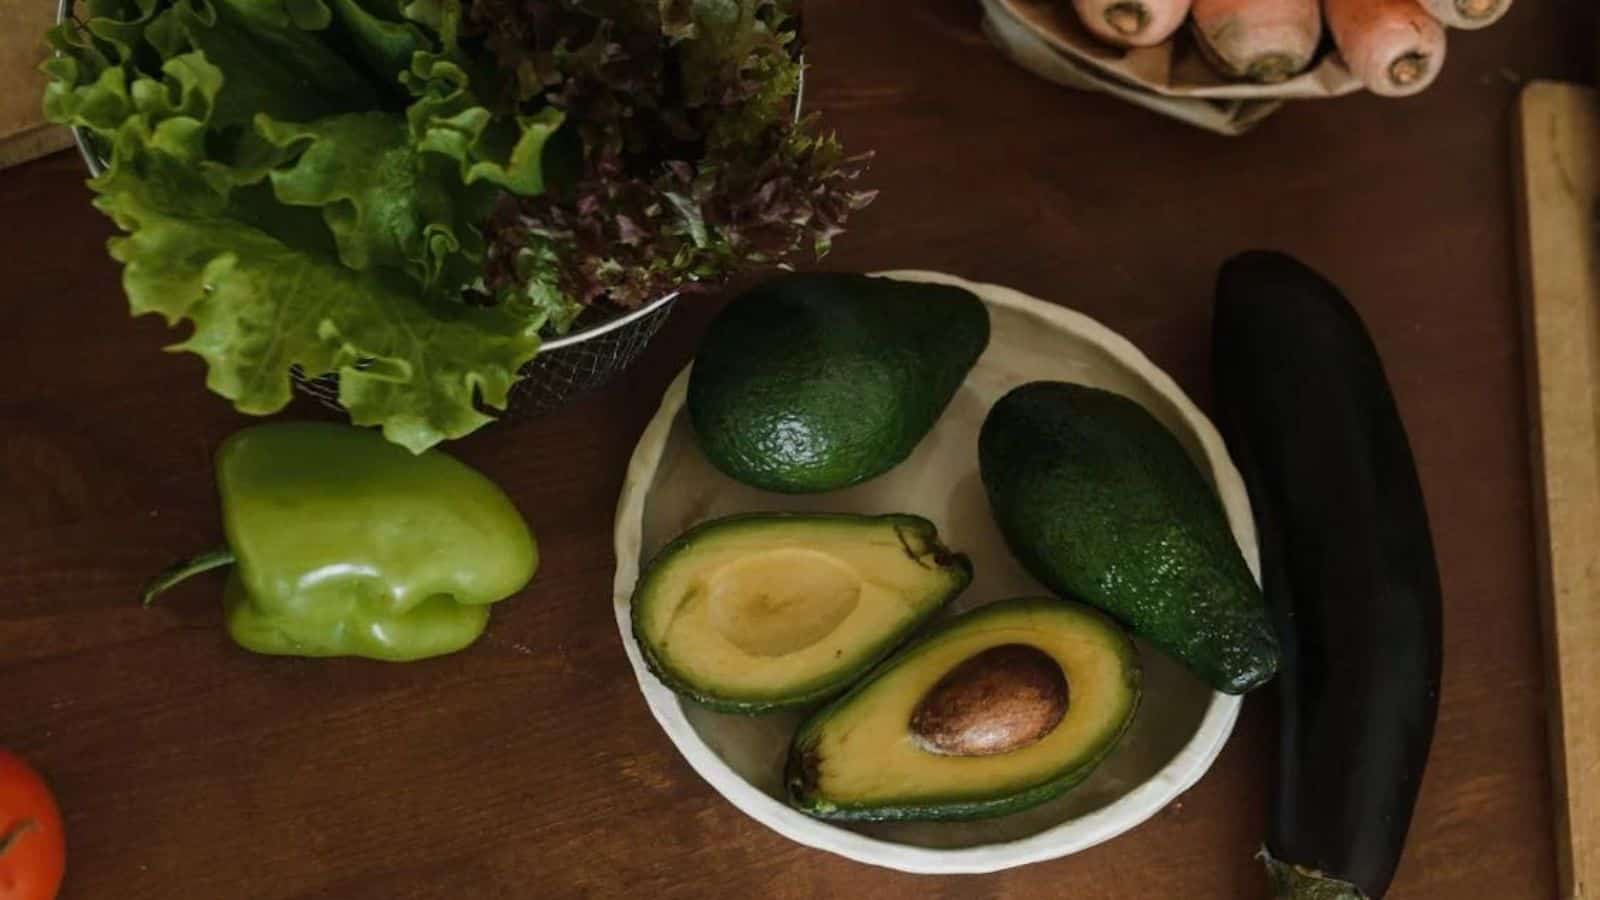 Close Up Photo of avocados in a plate accompanied by other vegetables.